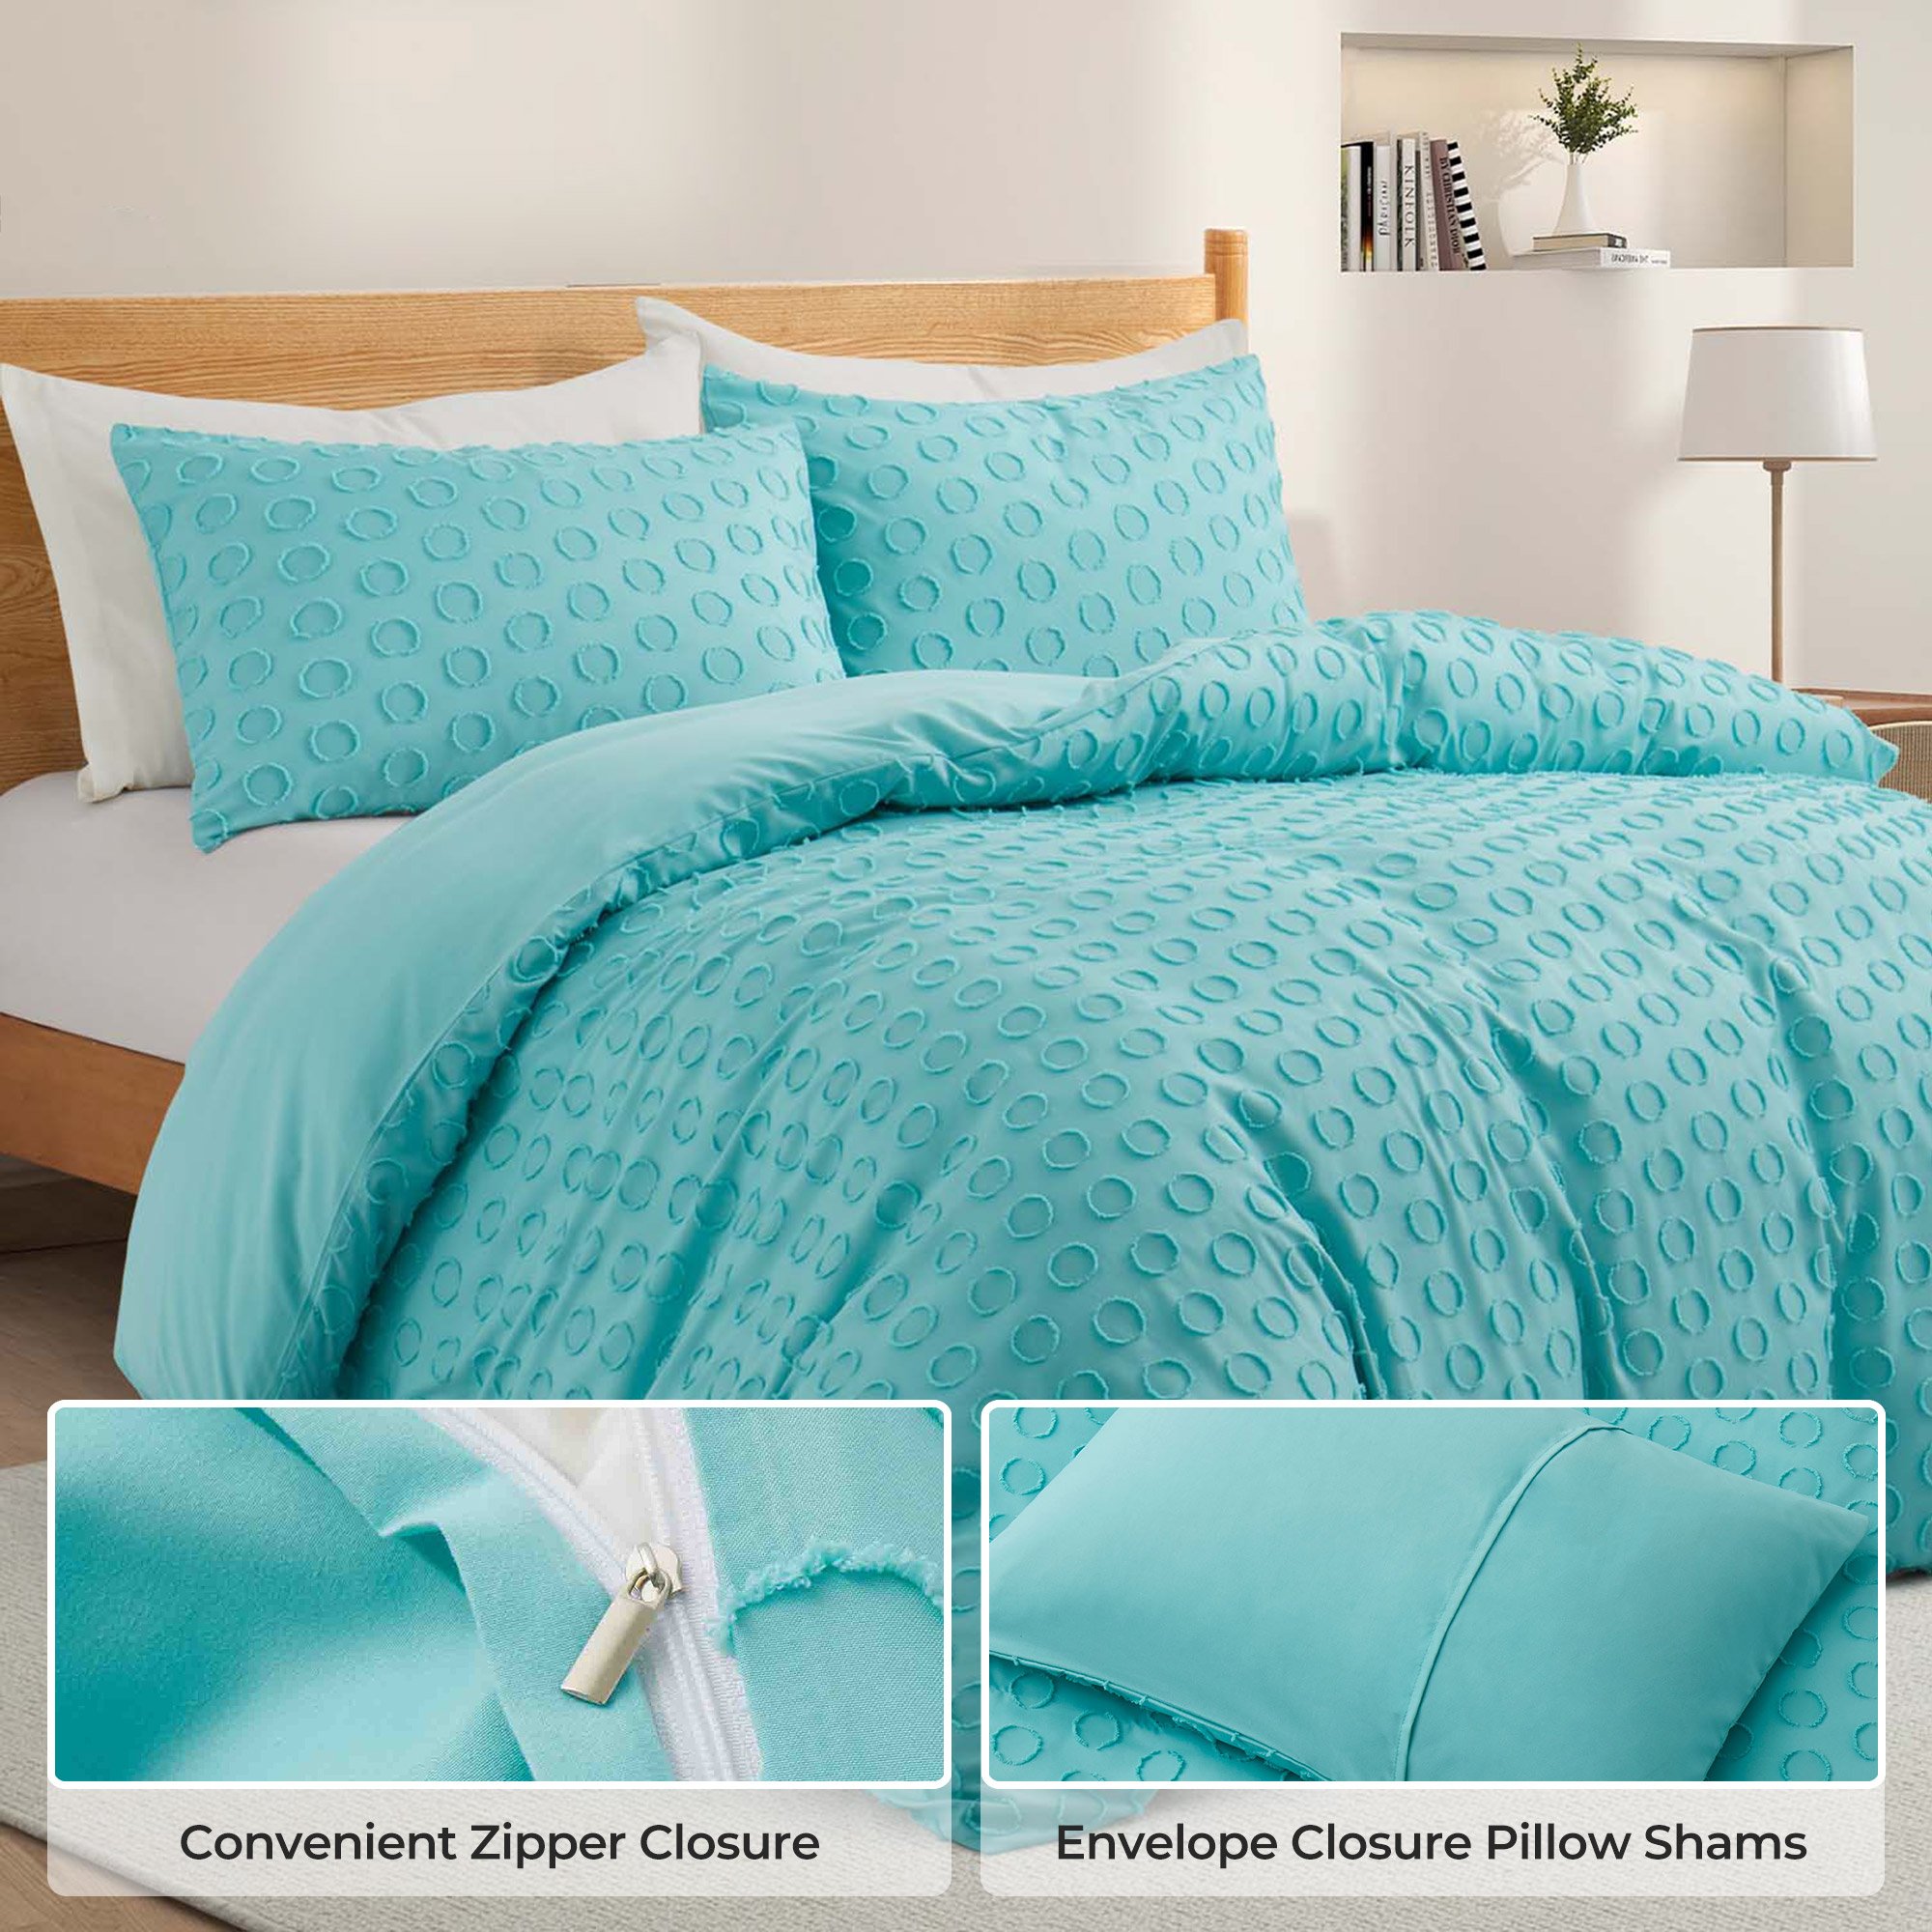 2 Or 3 Piece Duvet Cover Set With Shams - King Size